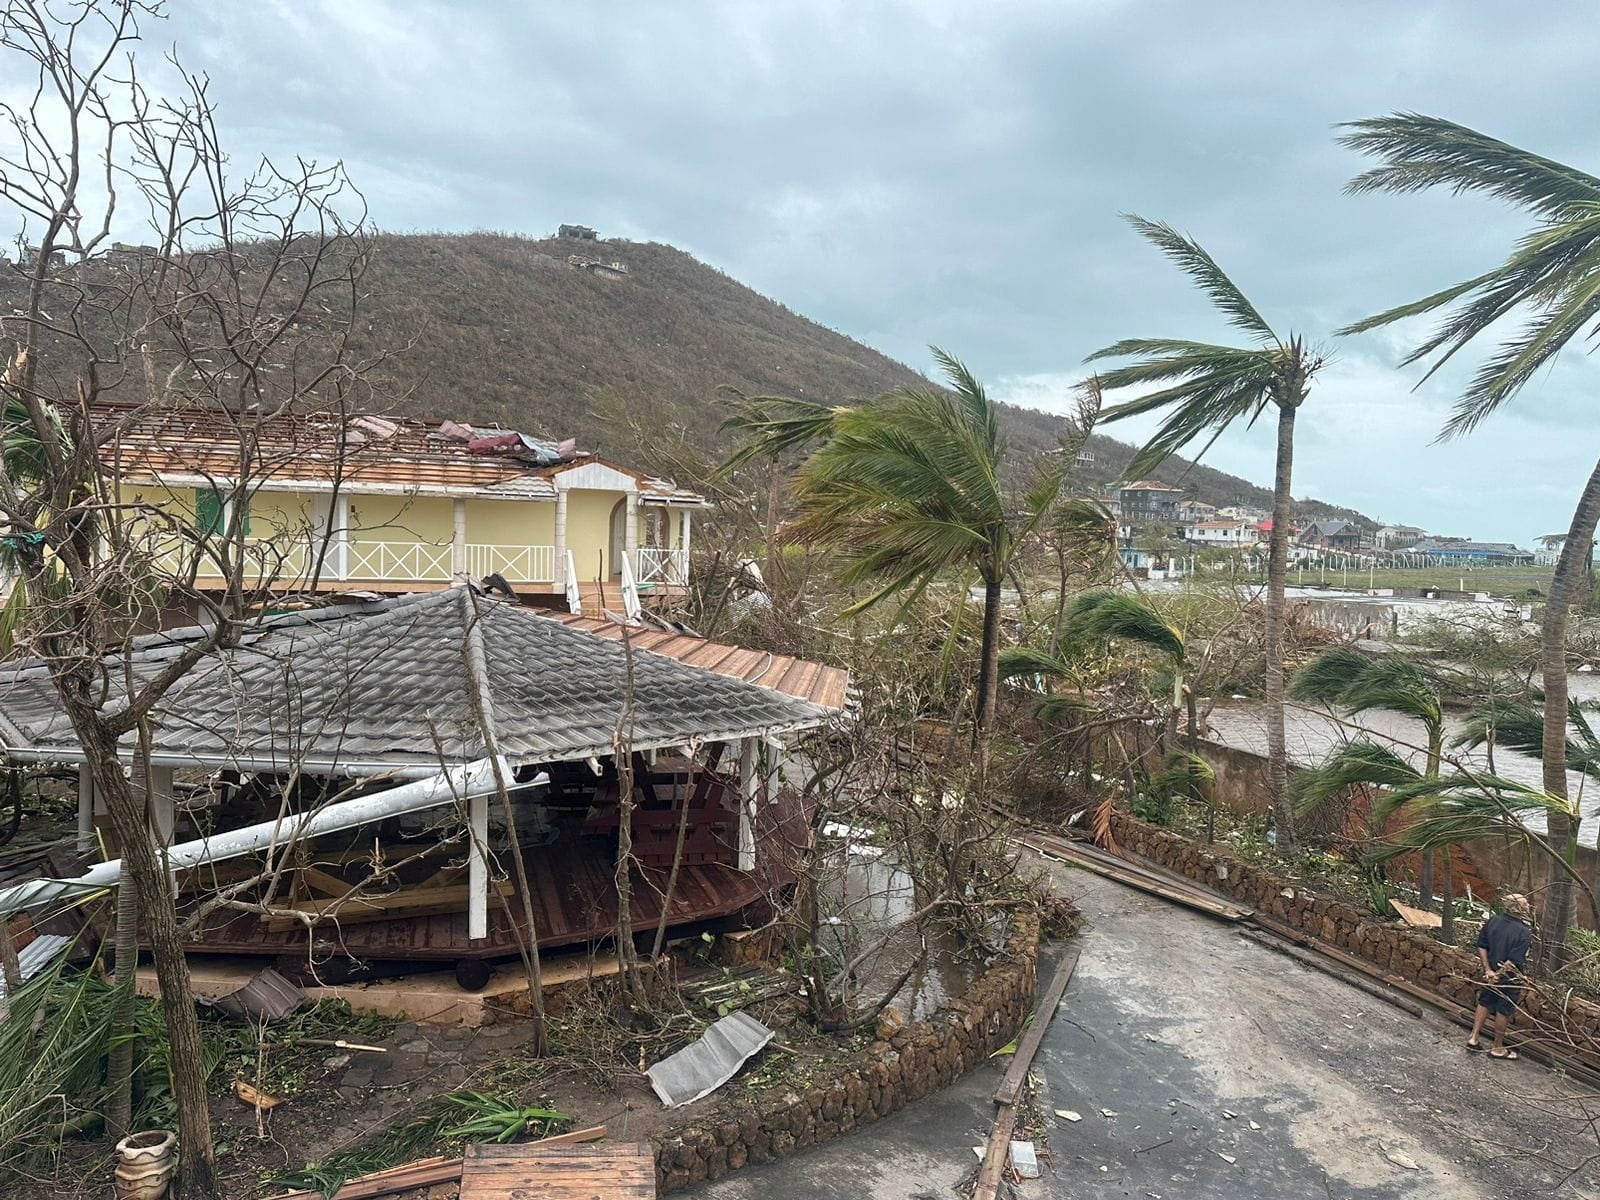 Damaged constructions and trees are pictured after the pass of Hurricane Beryl in Saint Vincent and the Grenadines